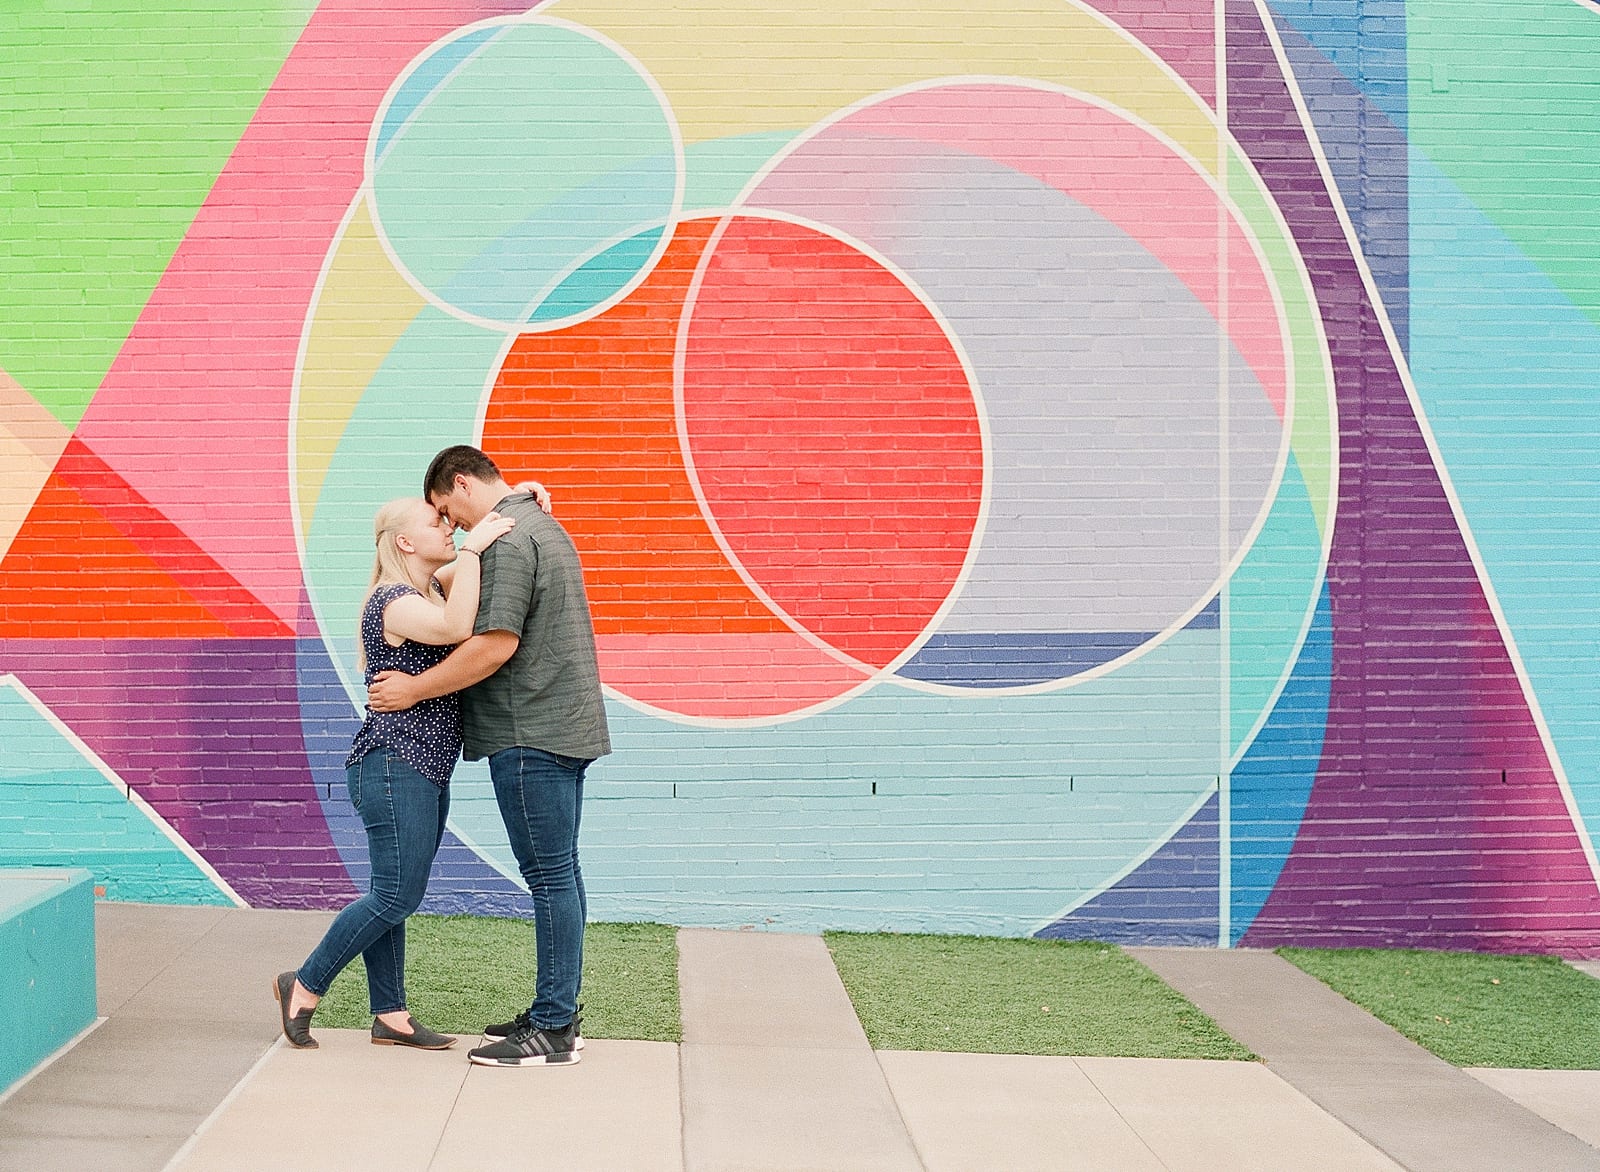 Downtown Raleigh NC Couple hugging in front of colorful wall photo